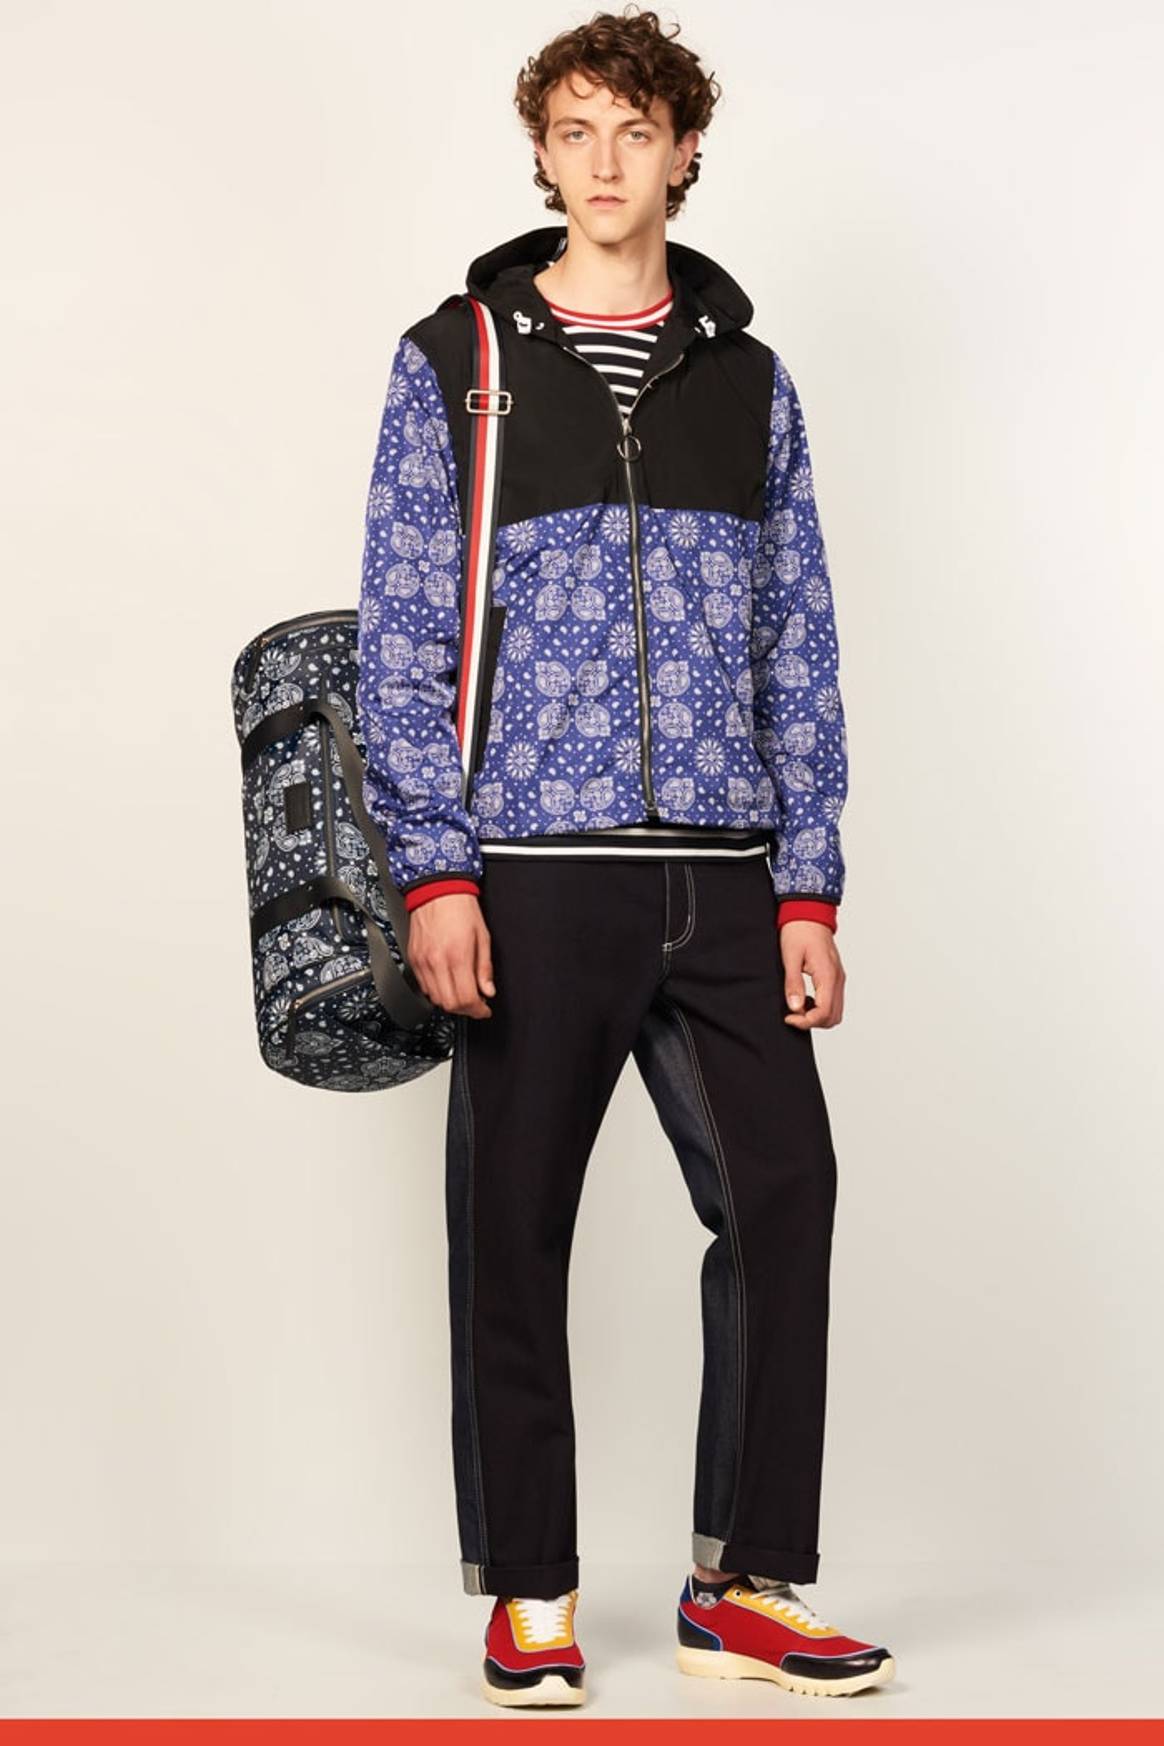 Tommy Hilfiger brings plenty of color and 70s inspiration to men's wear